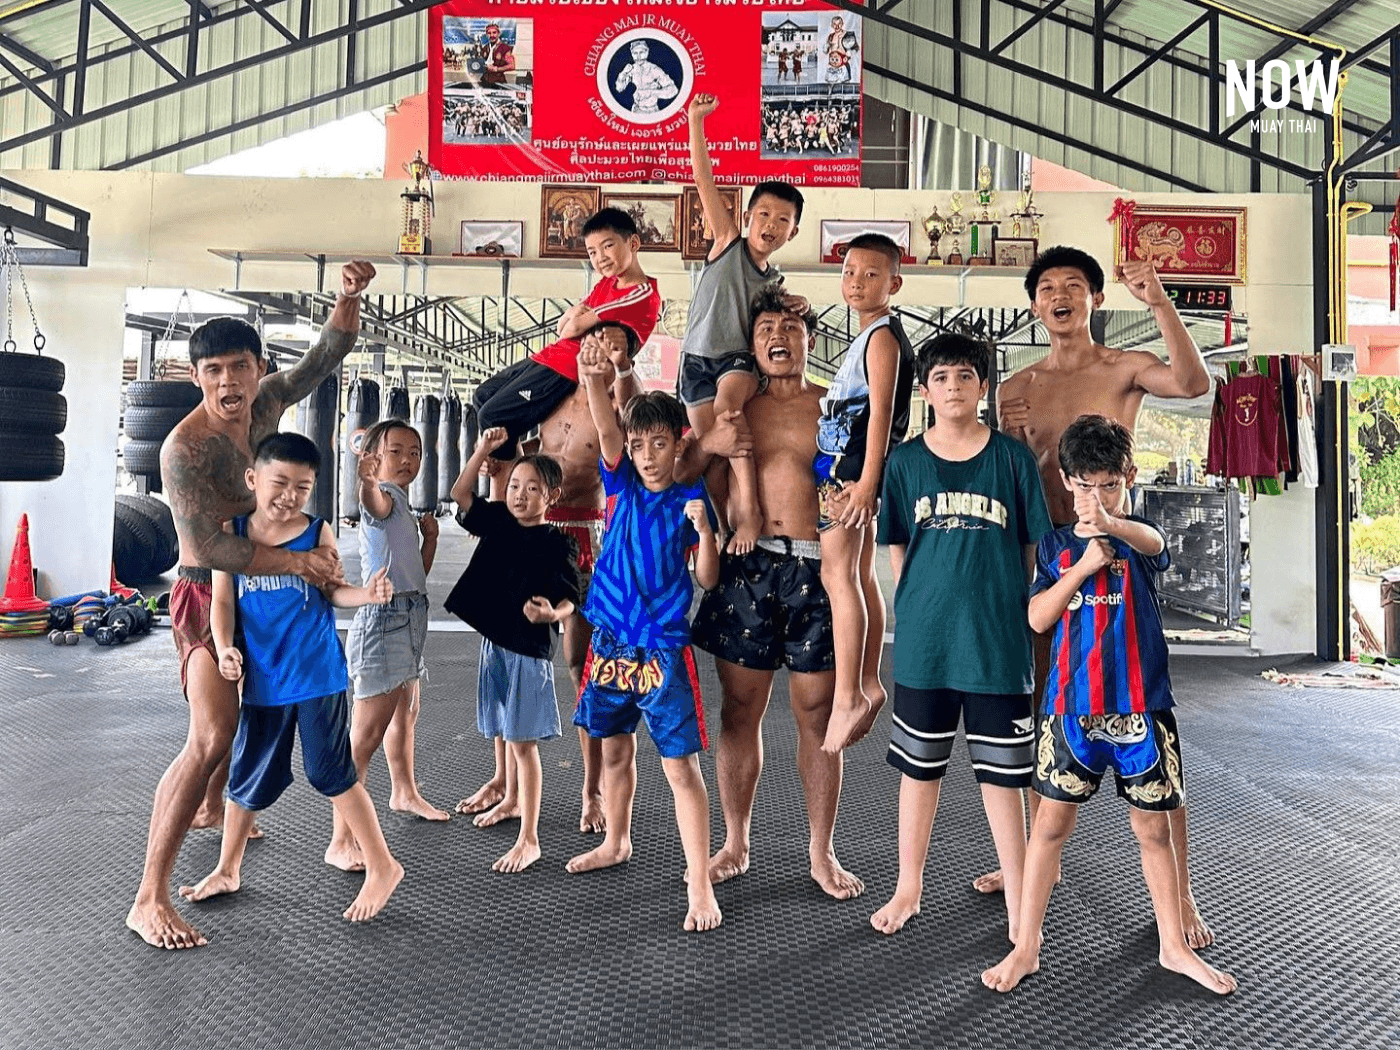 Adults and children pose at Chiangmai JR Muaythai Gym